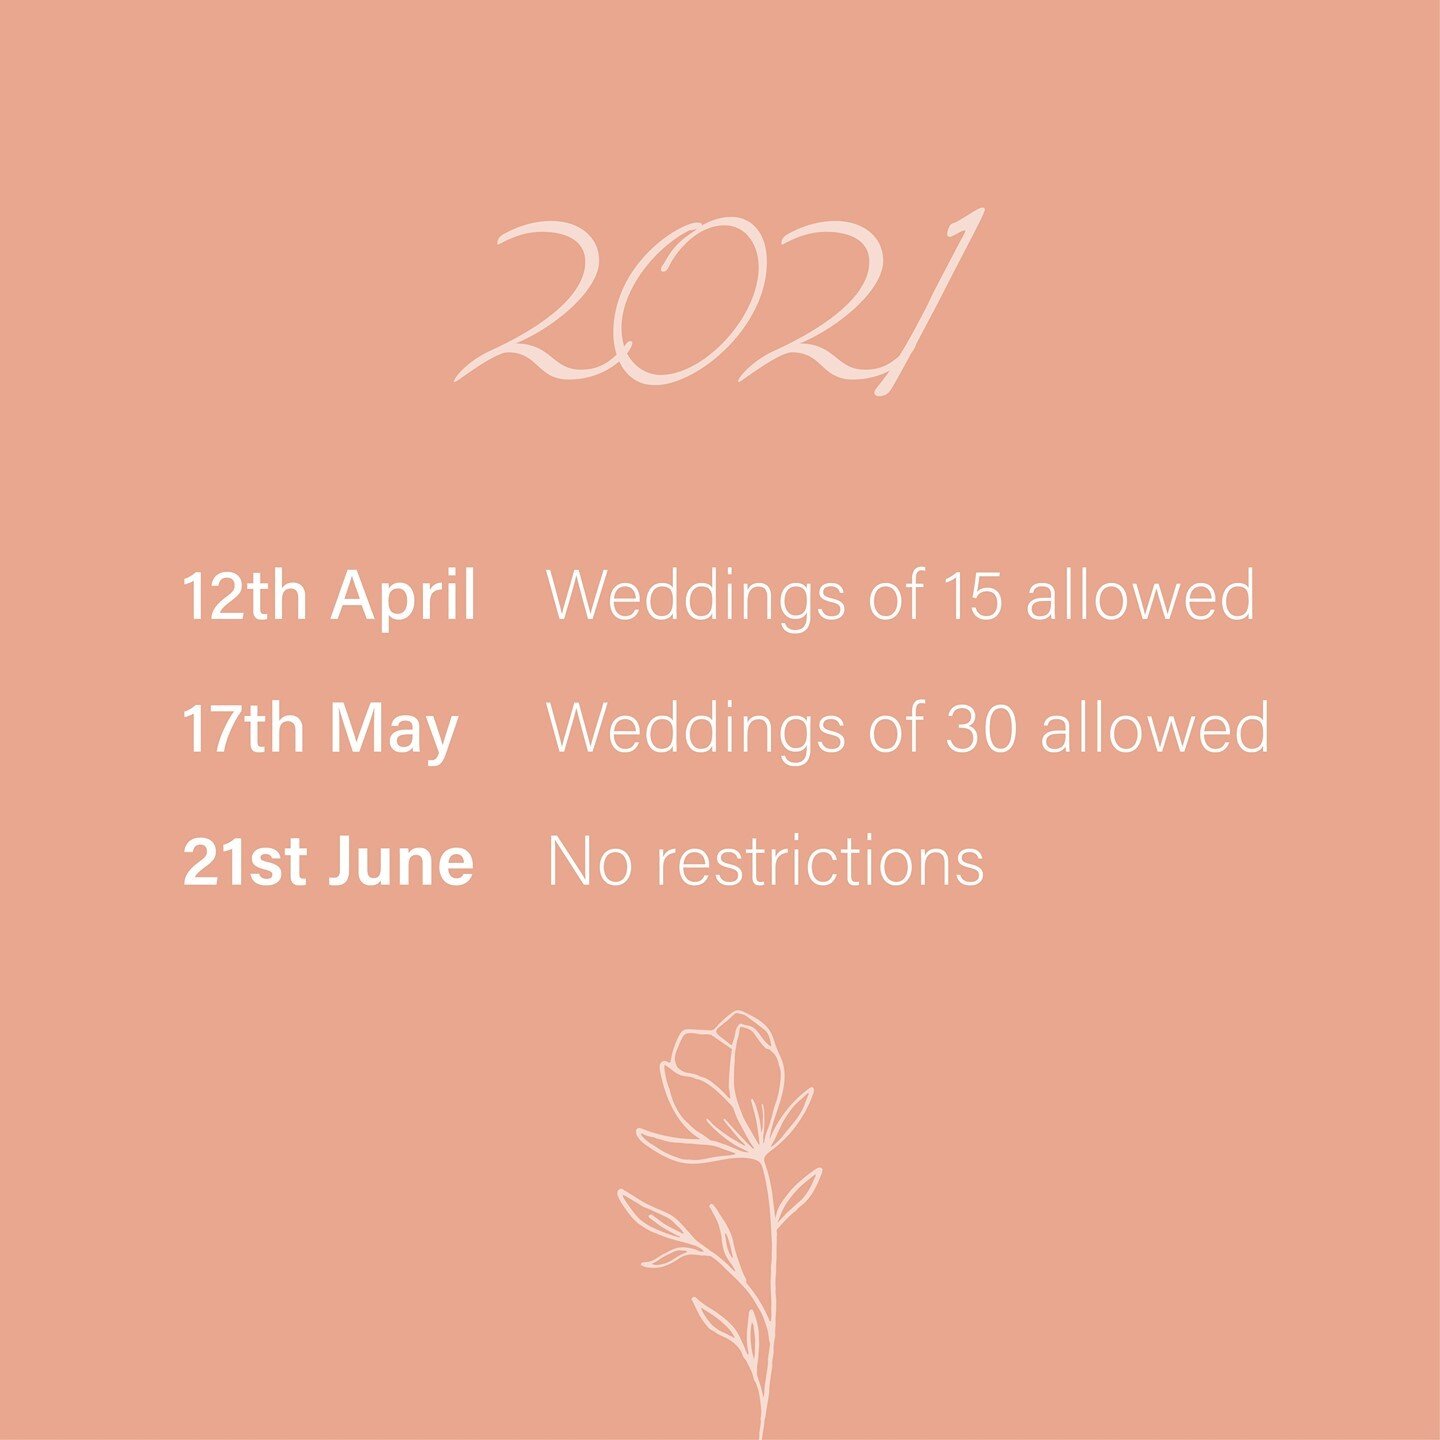 2021 WEDDINGS 💍 ⁠
⁠
So ahead of Boris's big announcement tonight, it would appear we already have the info we need! Obviously this is subject to change but hopefully all will go to plan!⁠
⁠
So what does this mean for invitations ⬇️⁠
⁠
CURRENT COUPLE